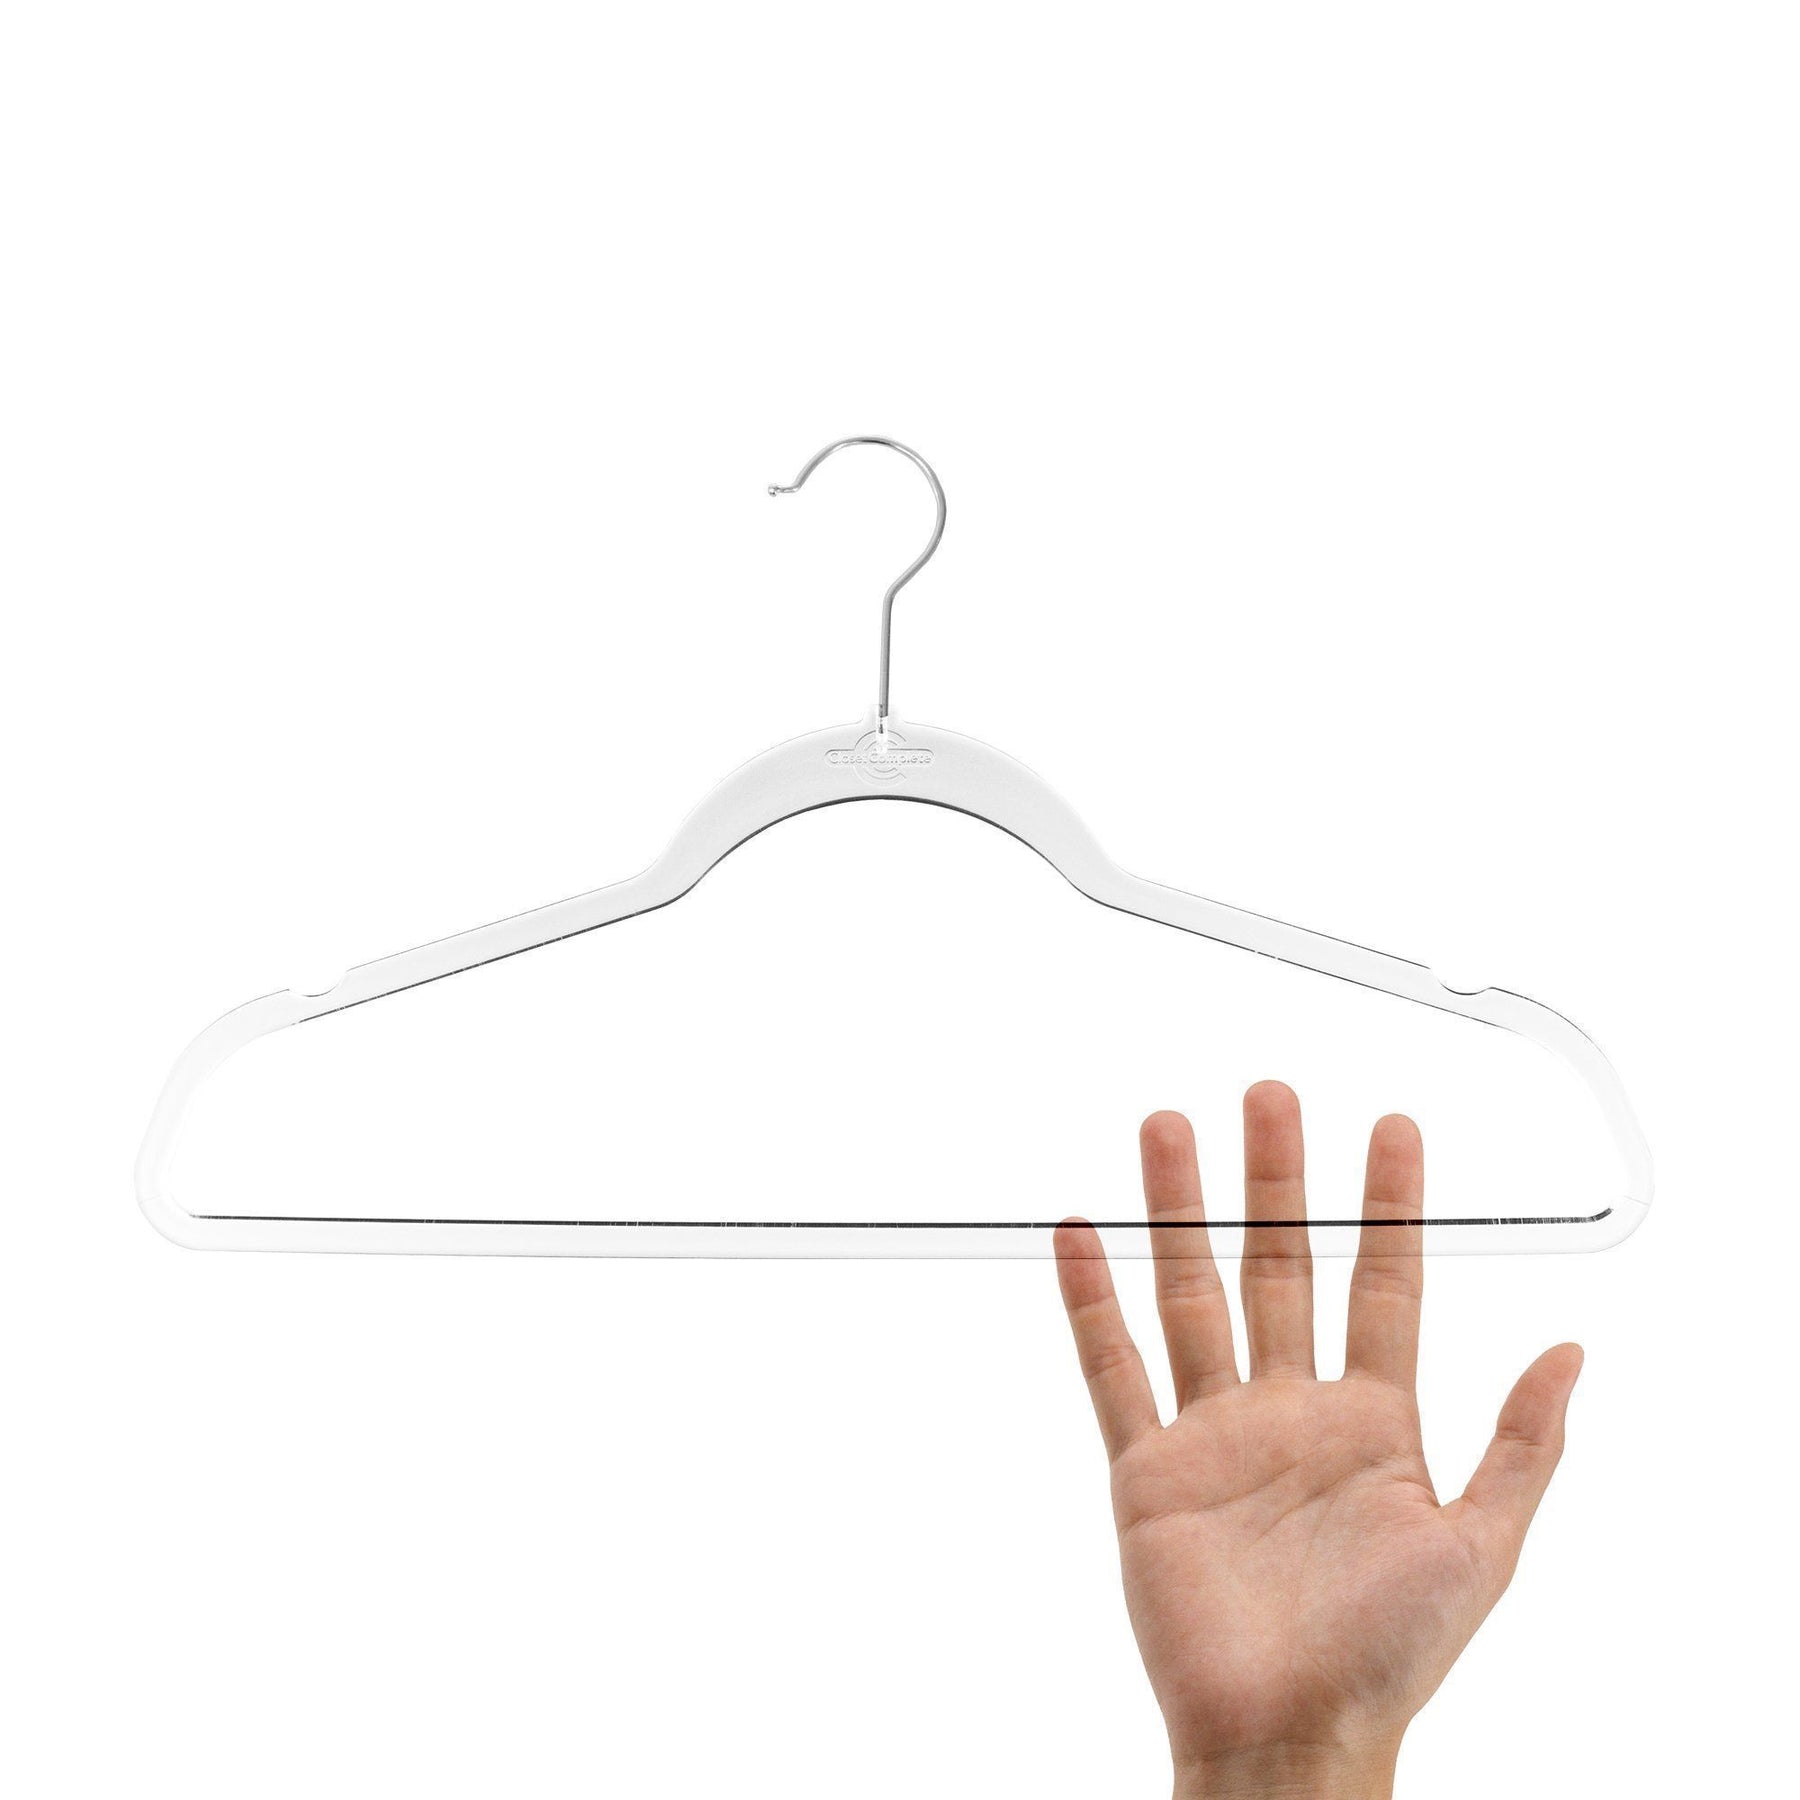 10 Pack Clear Acrylic Children's Hangers Kids Hanger Baby Toddler Infant-Hangers Clear Premium Hangers for Kids Clothes Closet (Clear)